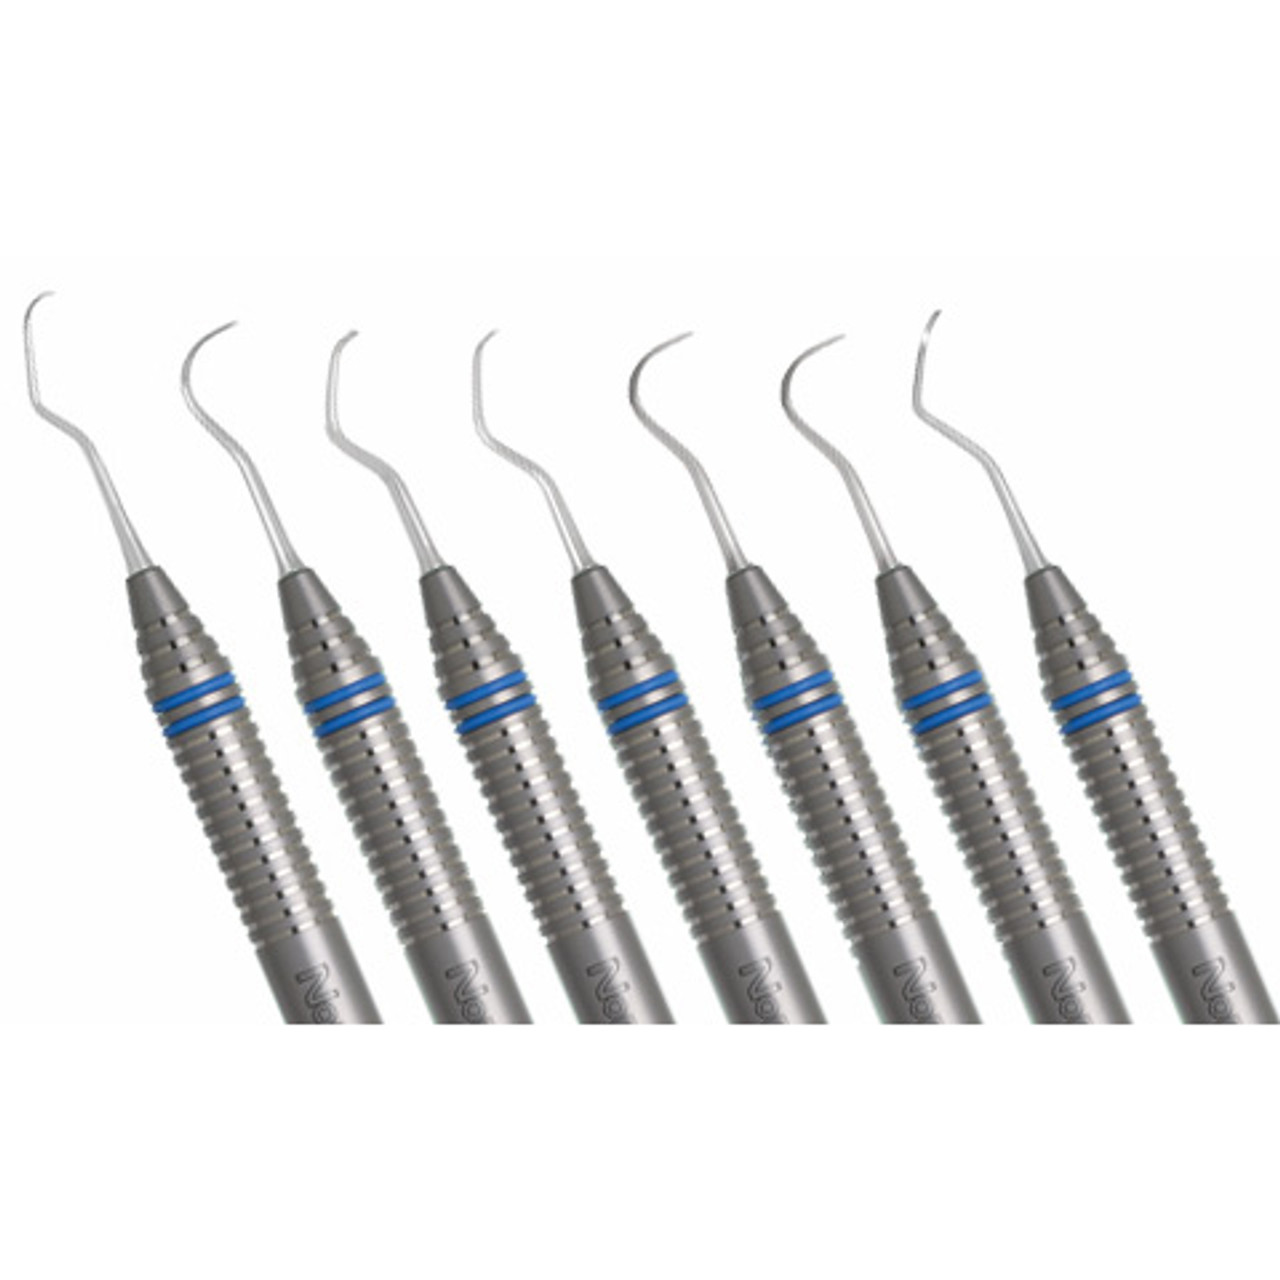 Nordent - Curette Columbia Double End 13/14 DuraLite ColorRing Stainless Steel Each